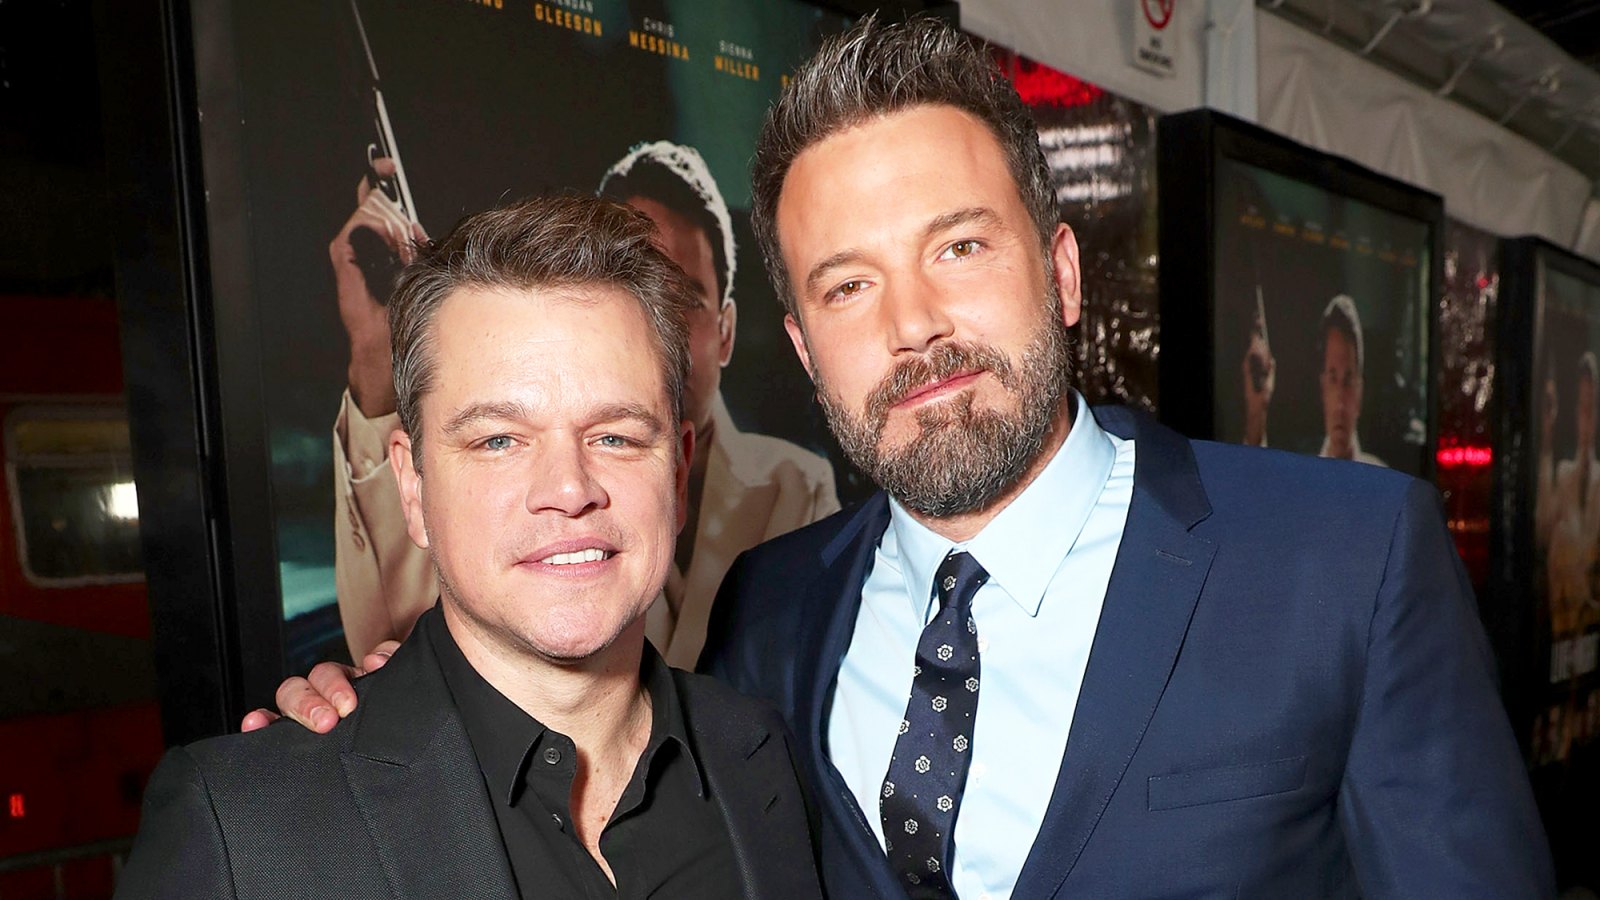 Matt Damon and Ben Affleck attend the premiere Of Warner Bros. Pictures' "Live By Night" at TCL Chinese Theatre on January 9, 2017 in Hollywood, California.